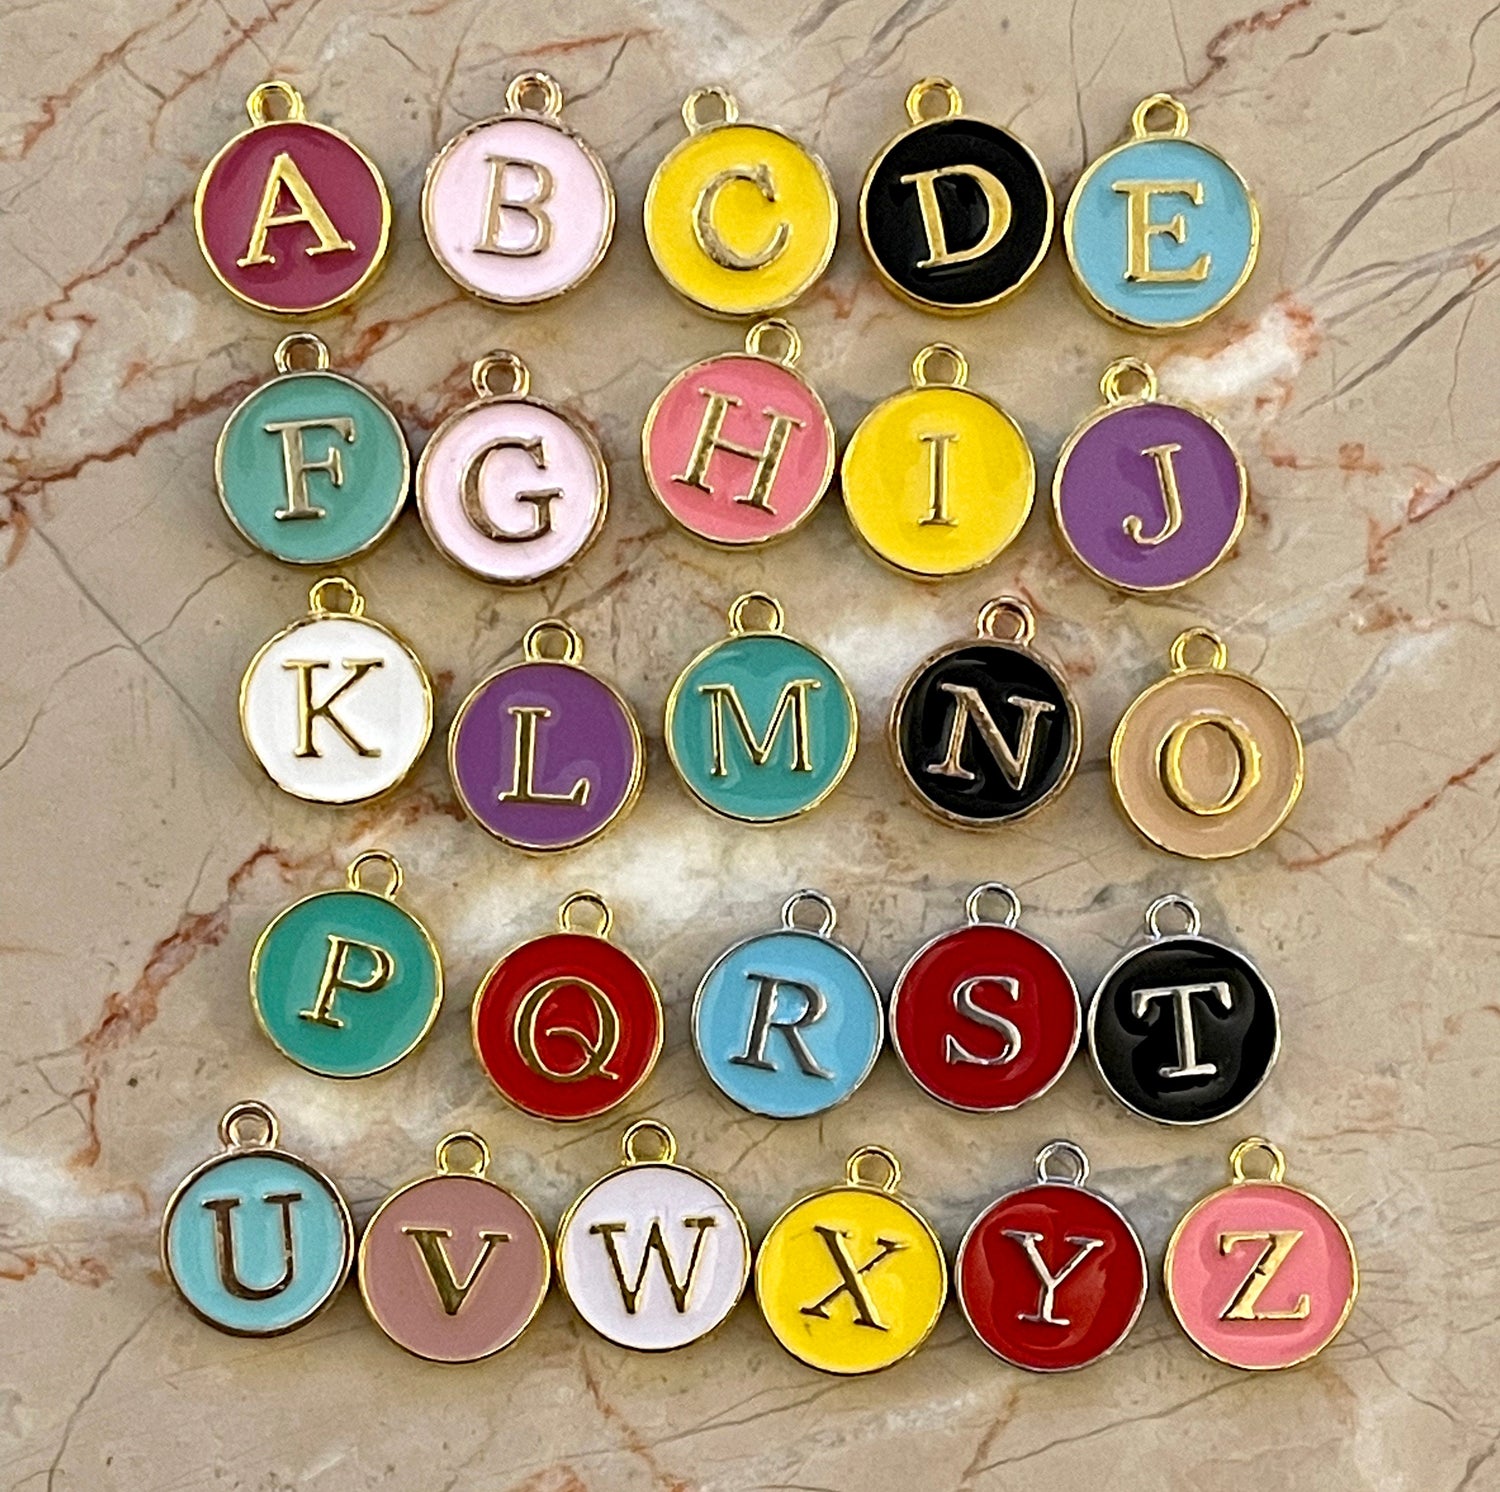 Letter charms–choose black, white, blue, pink, red, yellow, purple